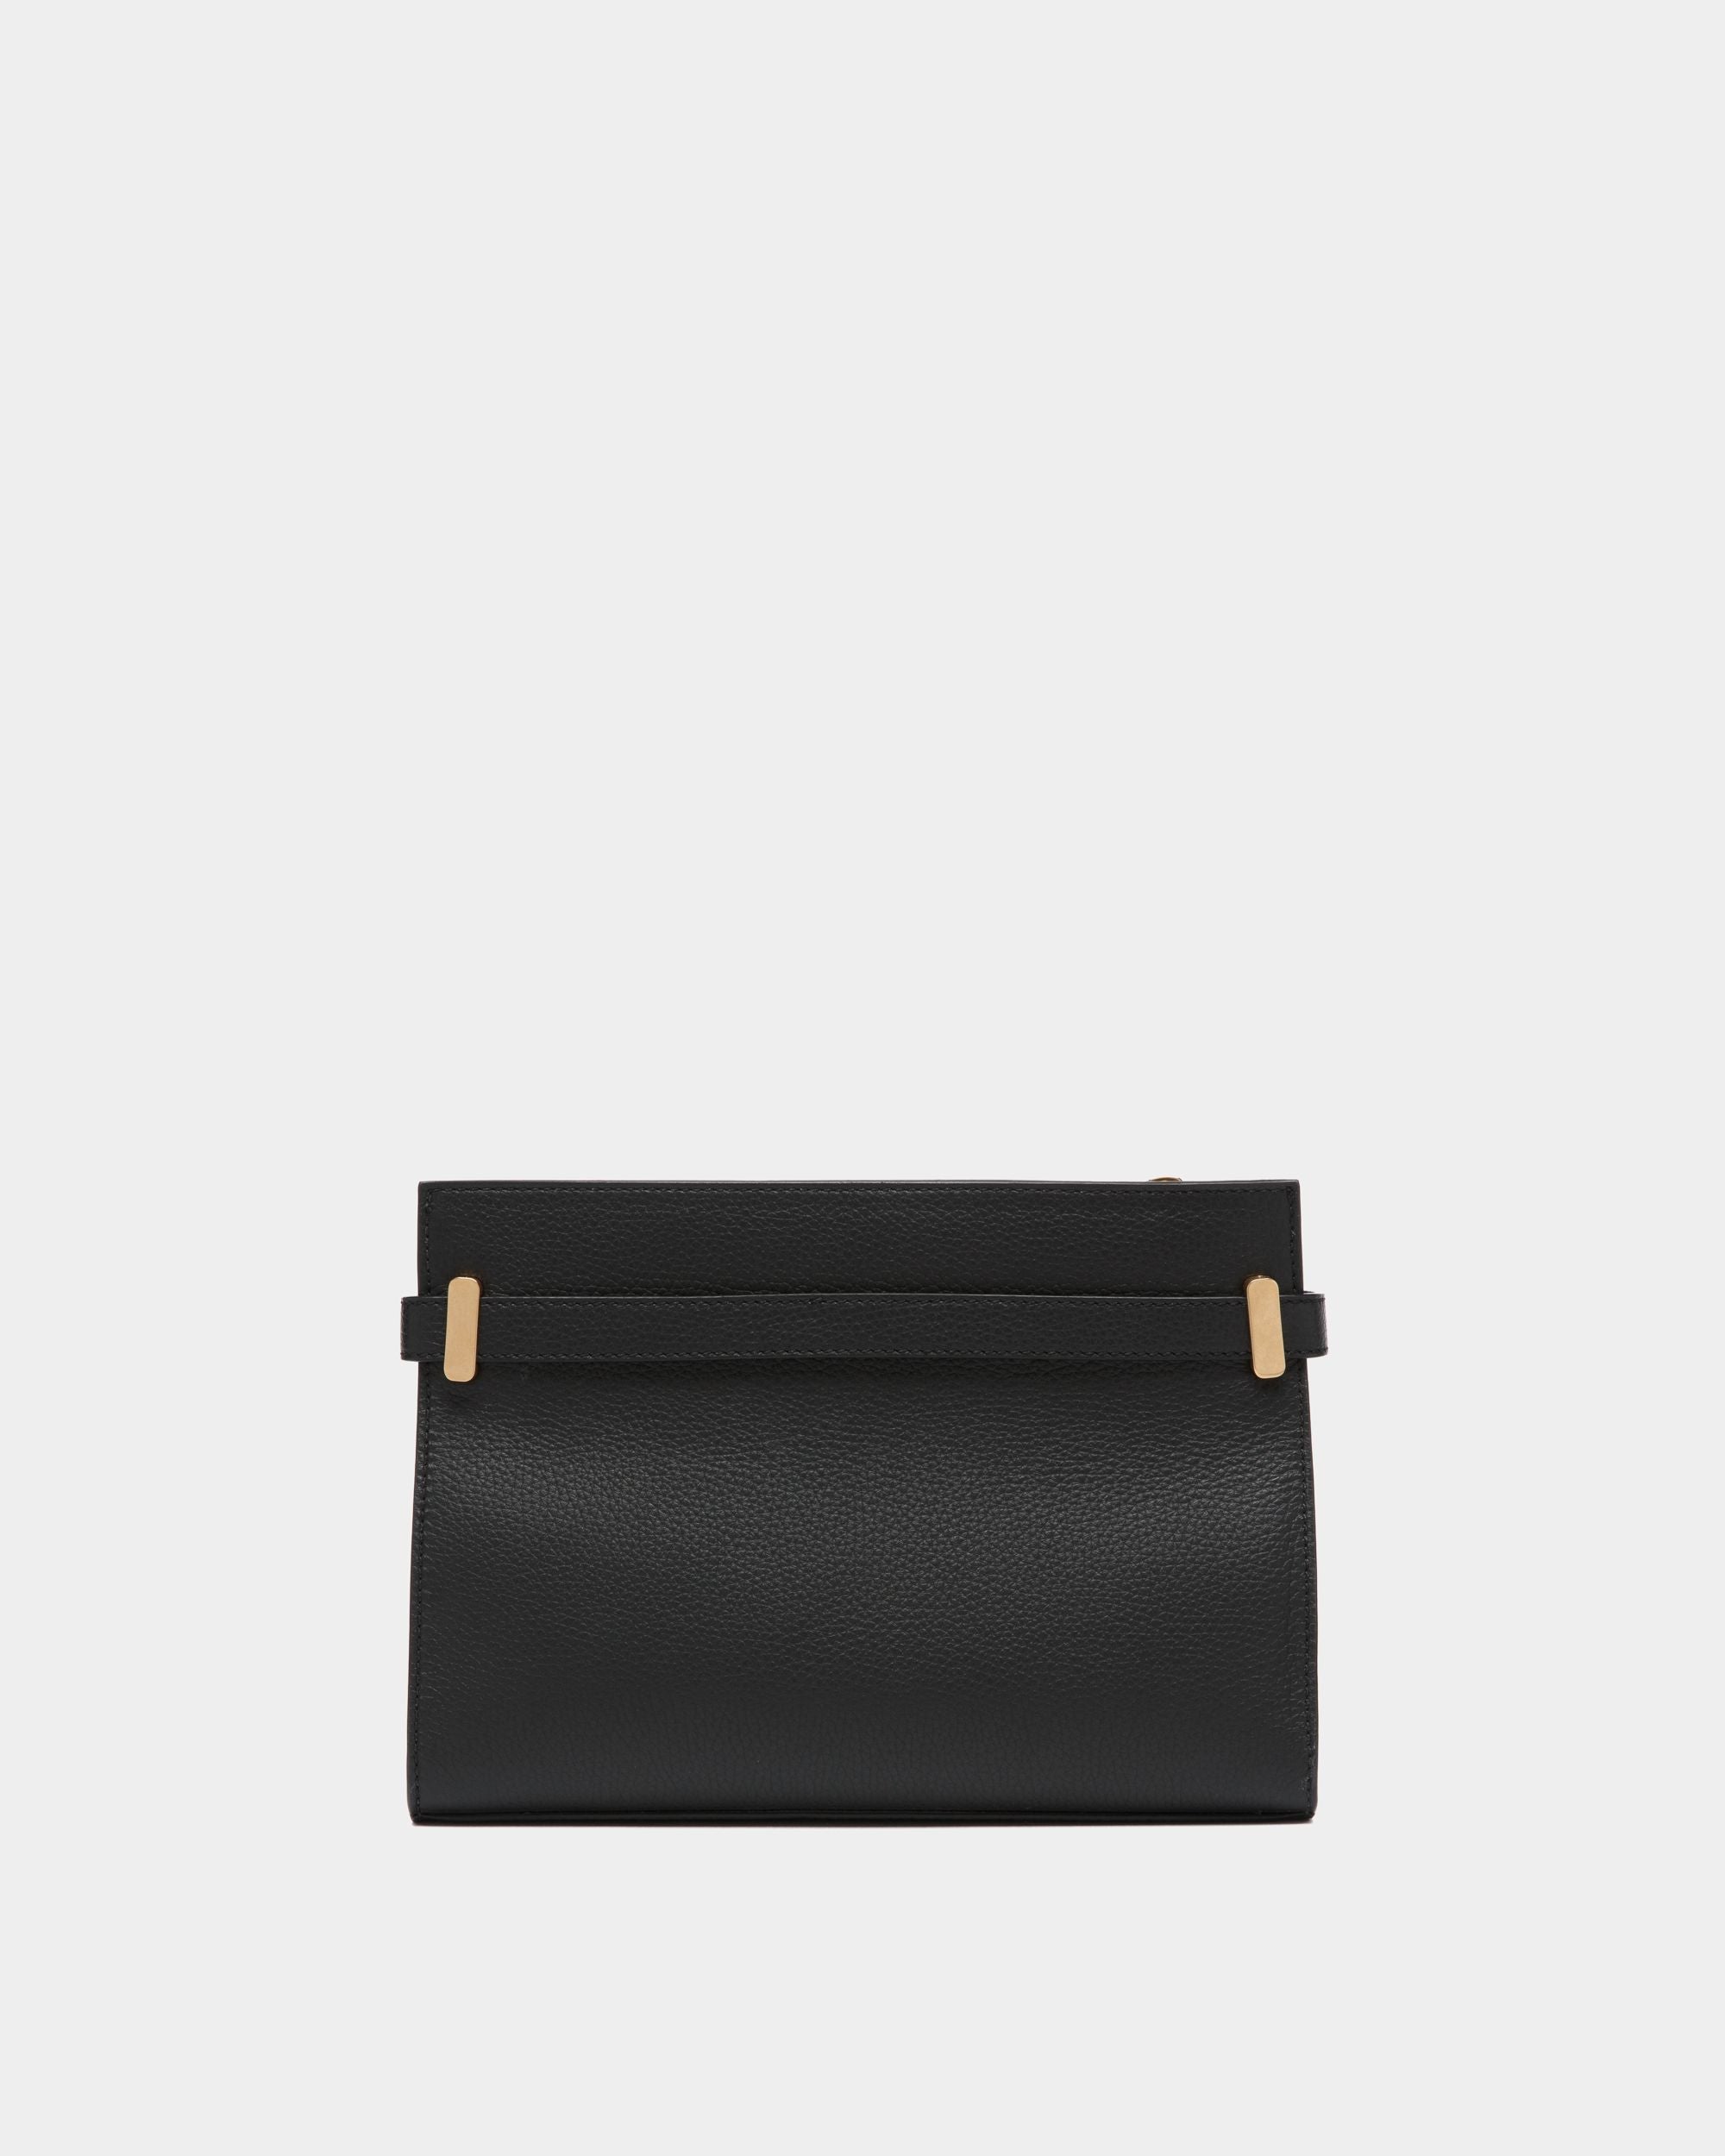 Carriage | Women's Shoulder Bag in Black Grained Leather | Bally | Still Life Back